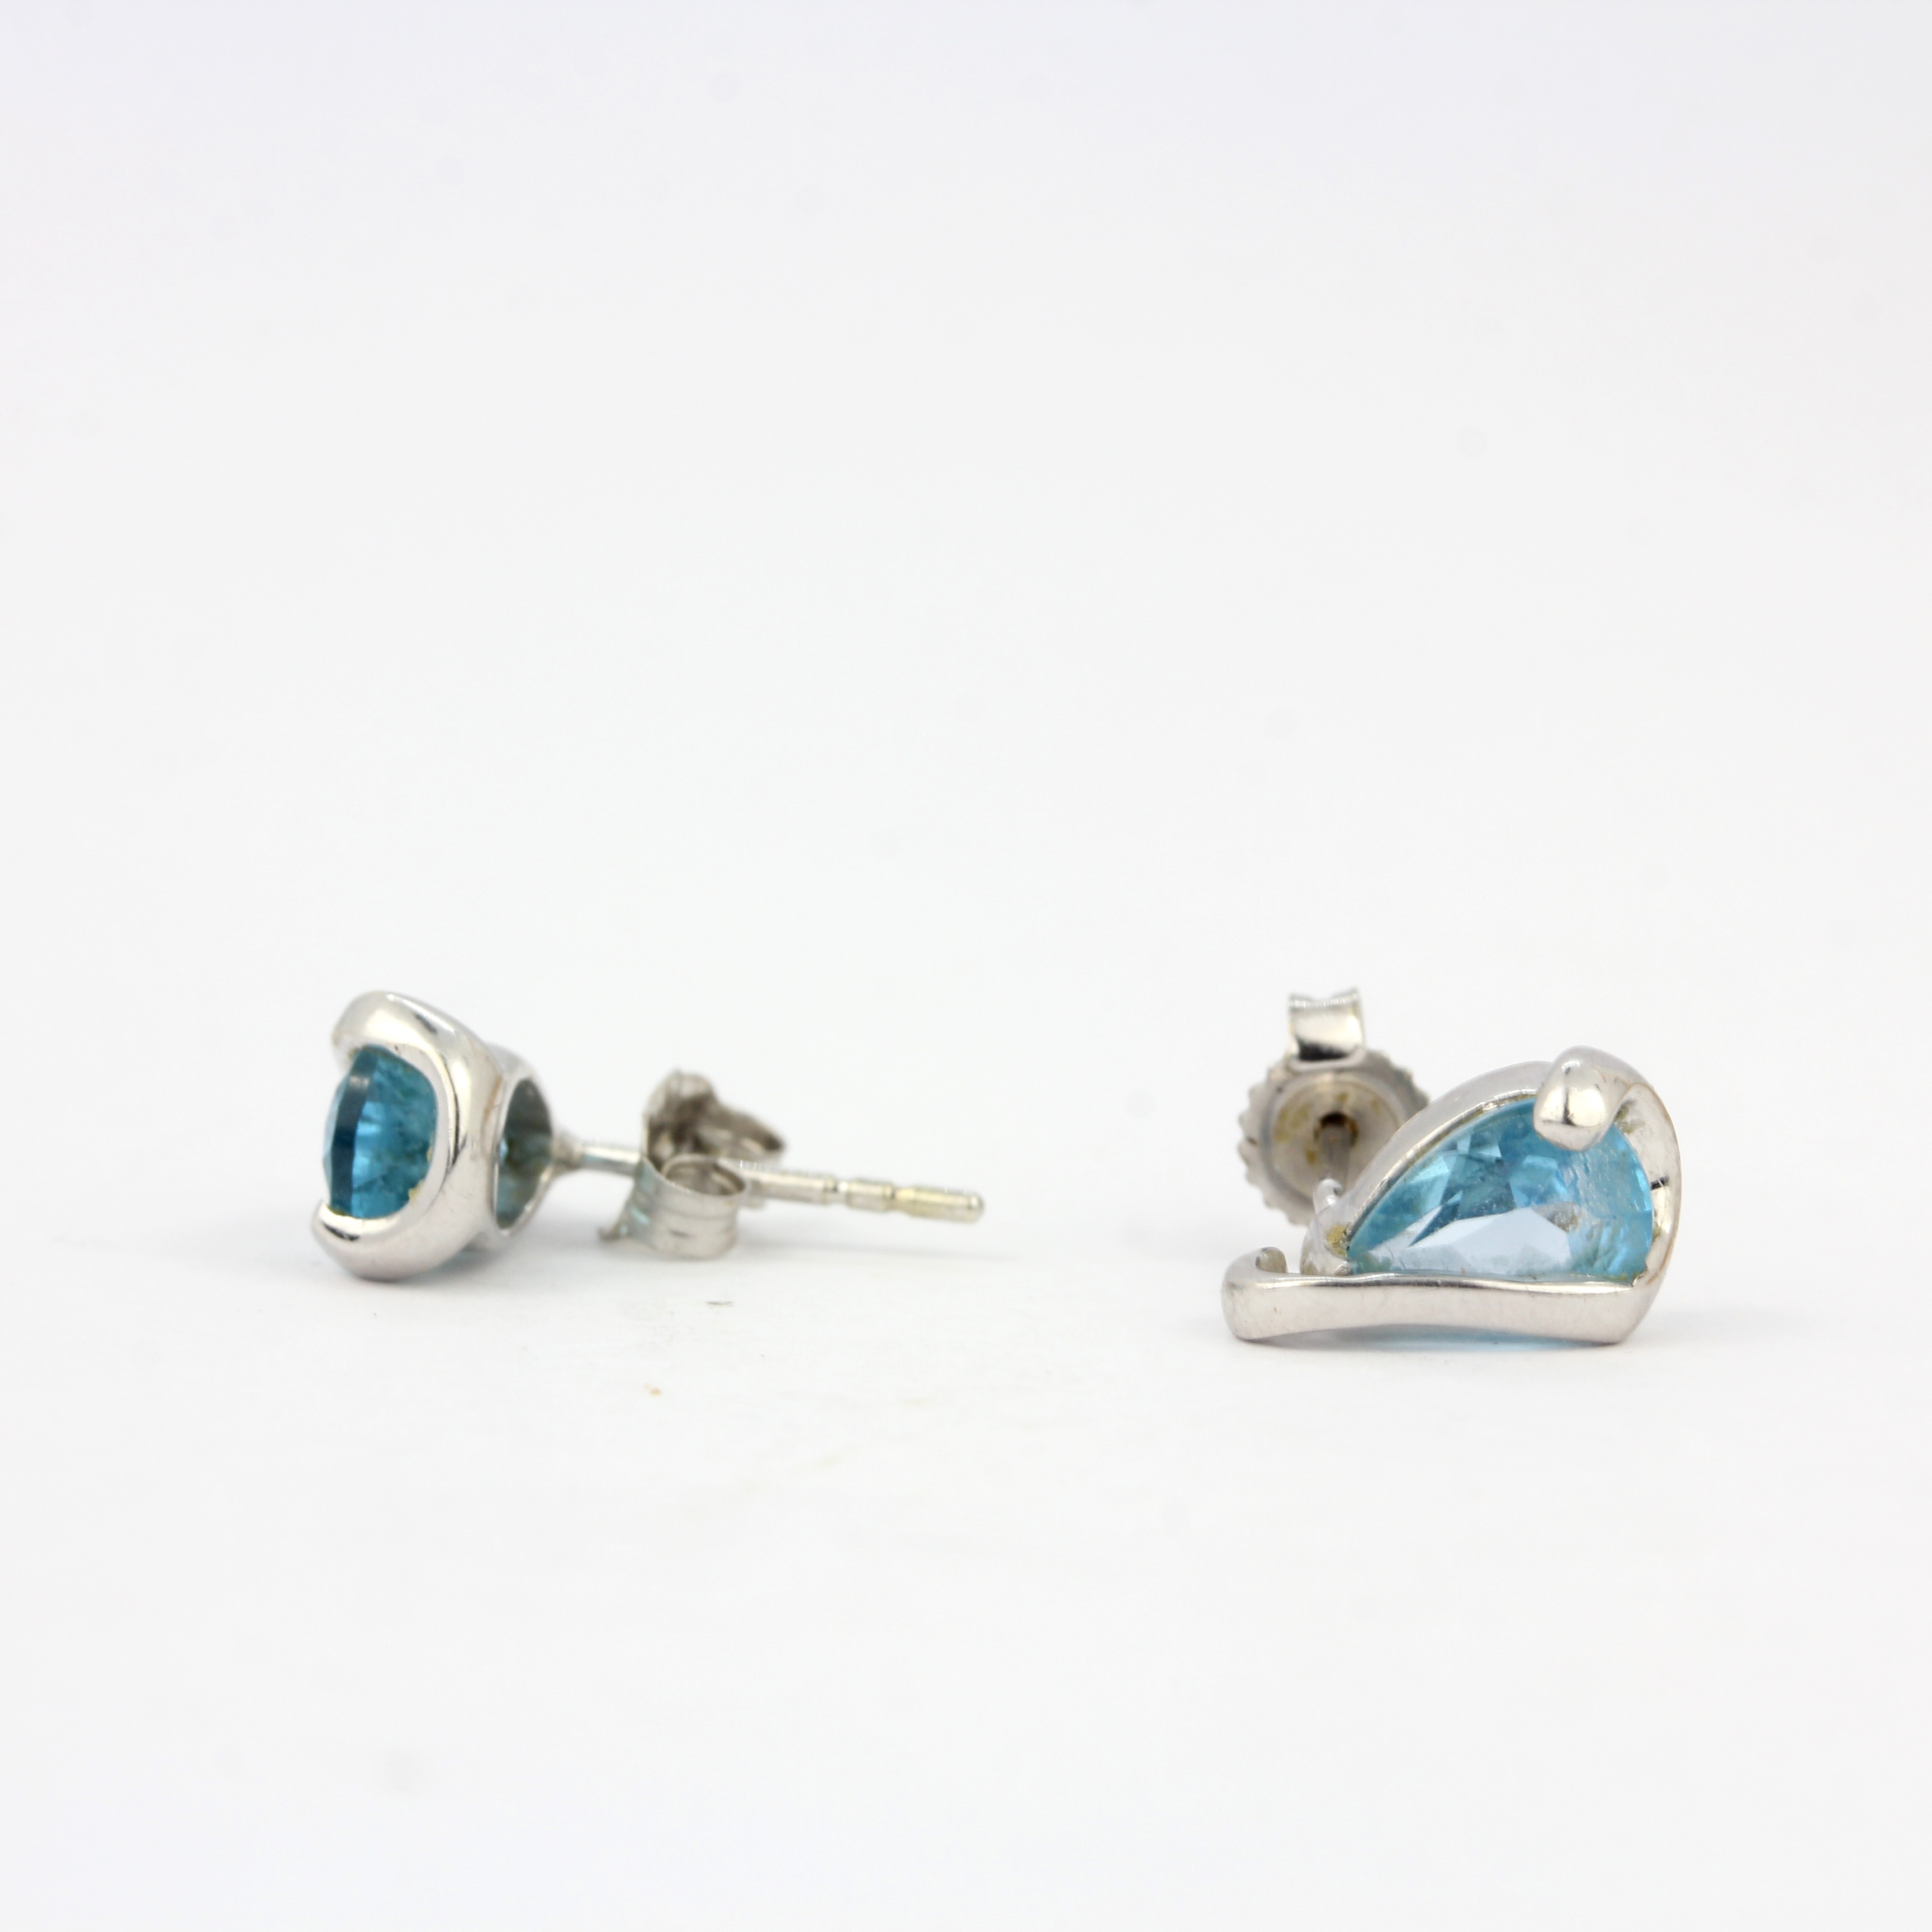 A pair of 925 silver earrings set with pear cut blue topaz, L. 1cm. - Image 2 of 3